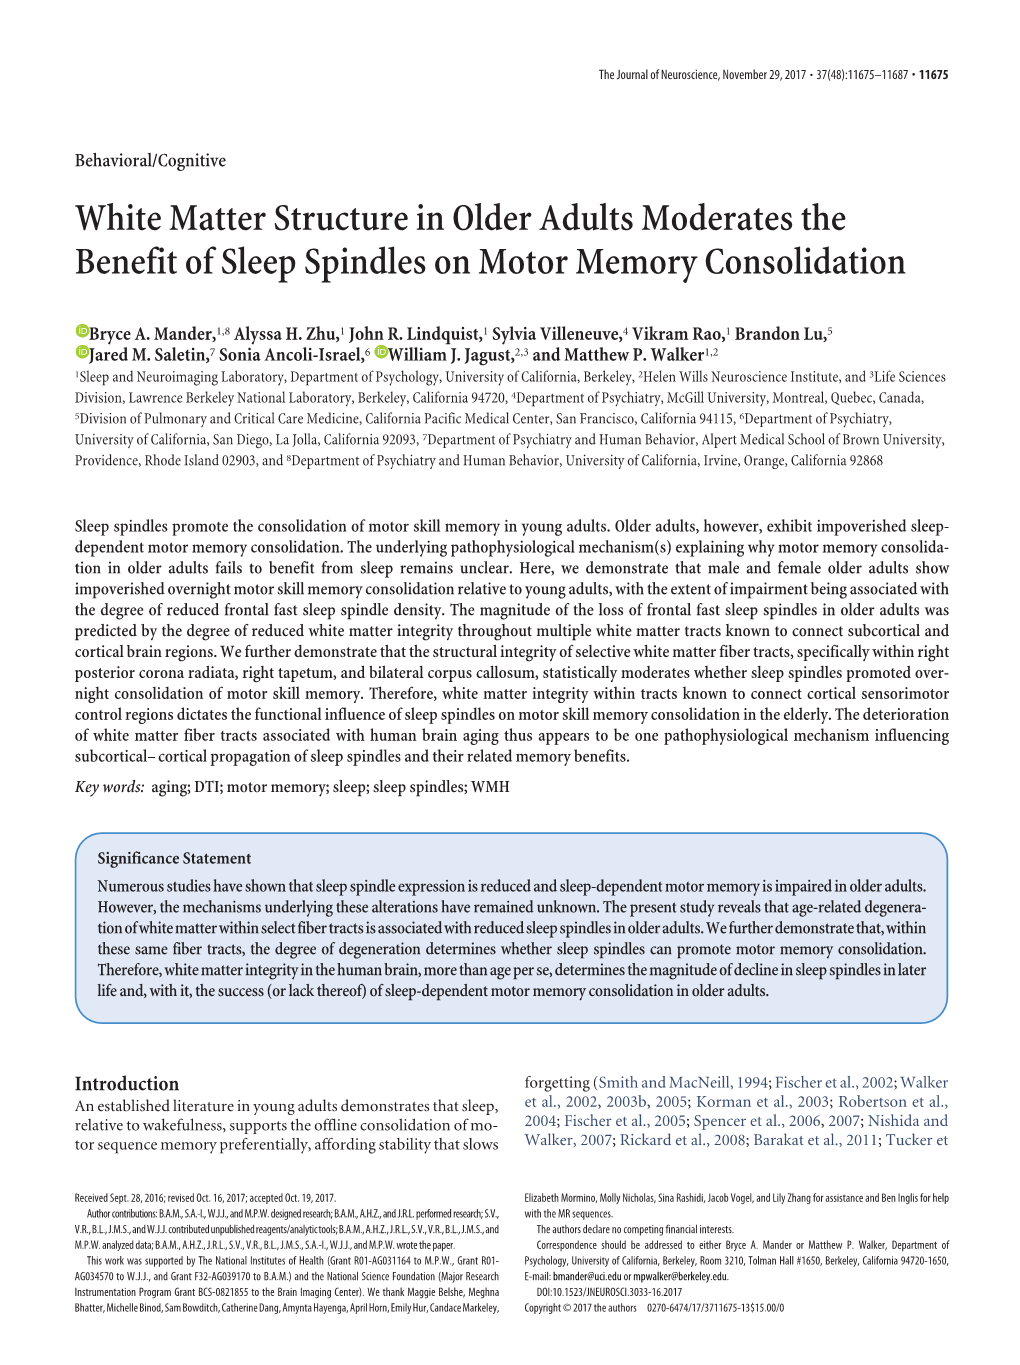 White Matter Structure in Older Adults Moderates the Benefit of Sleep Spindles on Motor Memory Consolidation